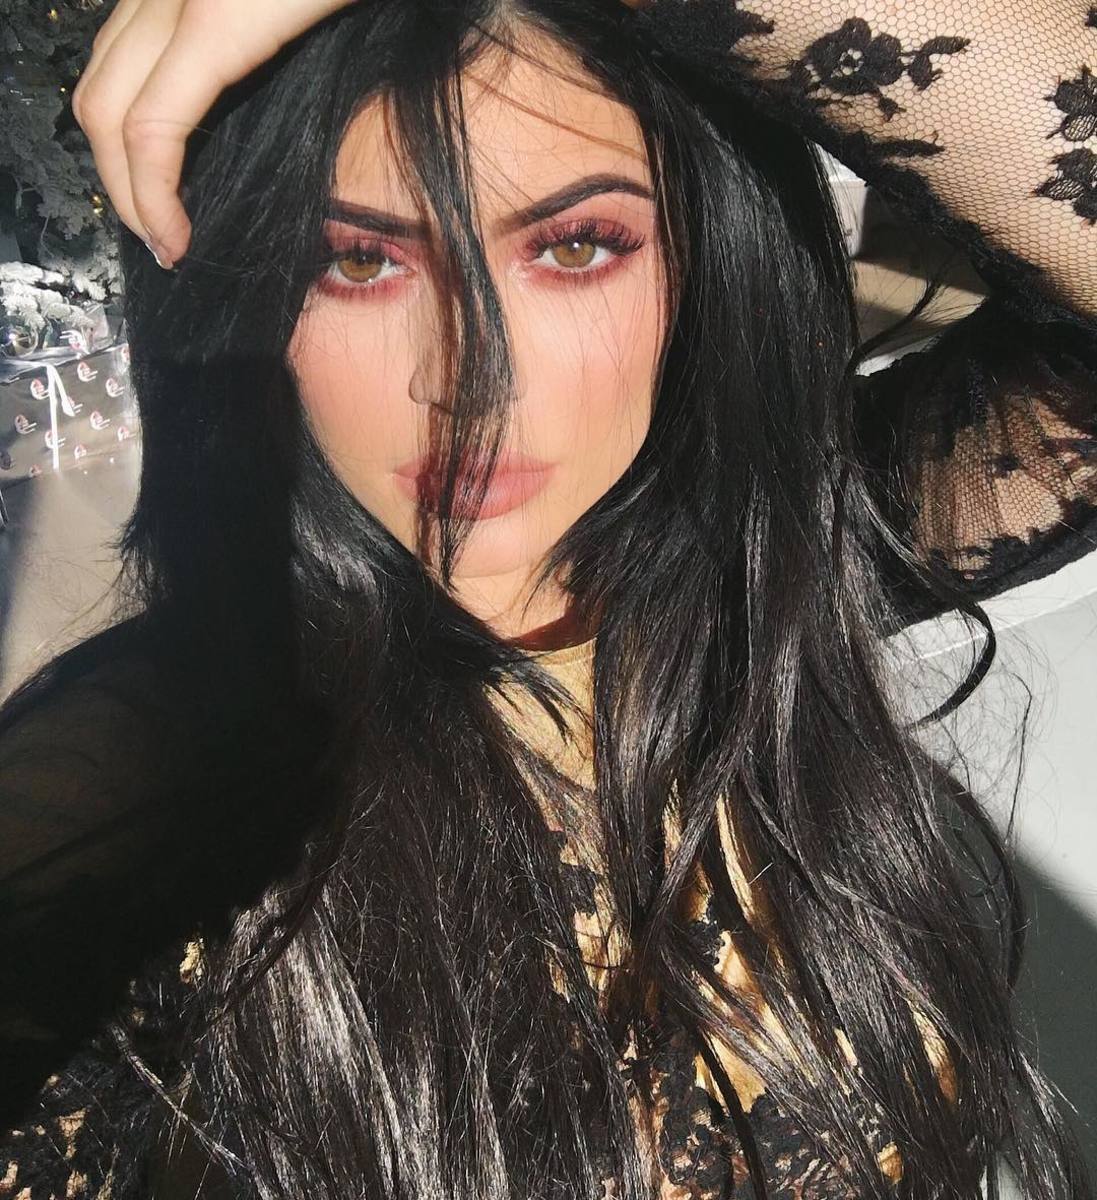 Kylie Jenner, you've got some competition. Photo: @kyliejenner/Instagram